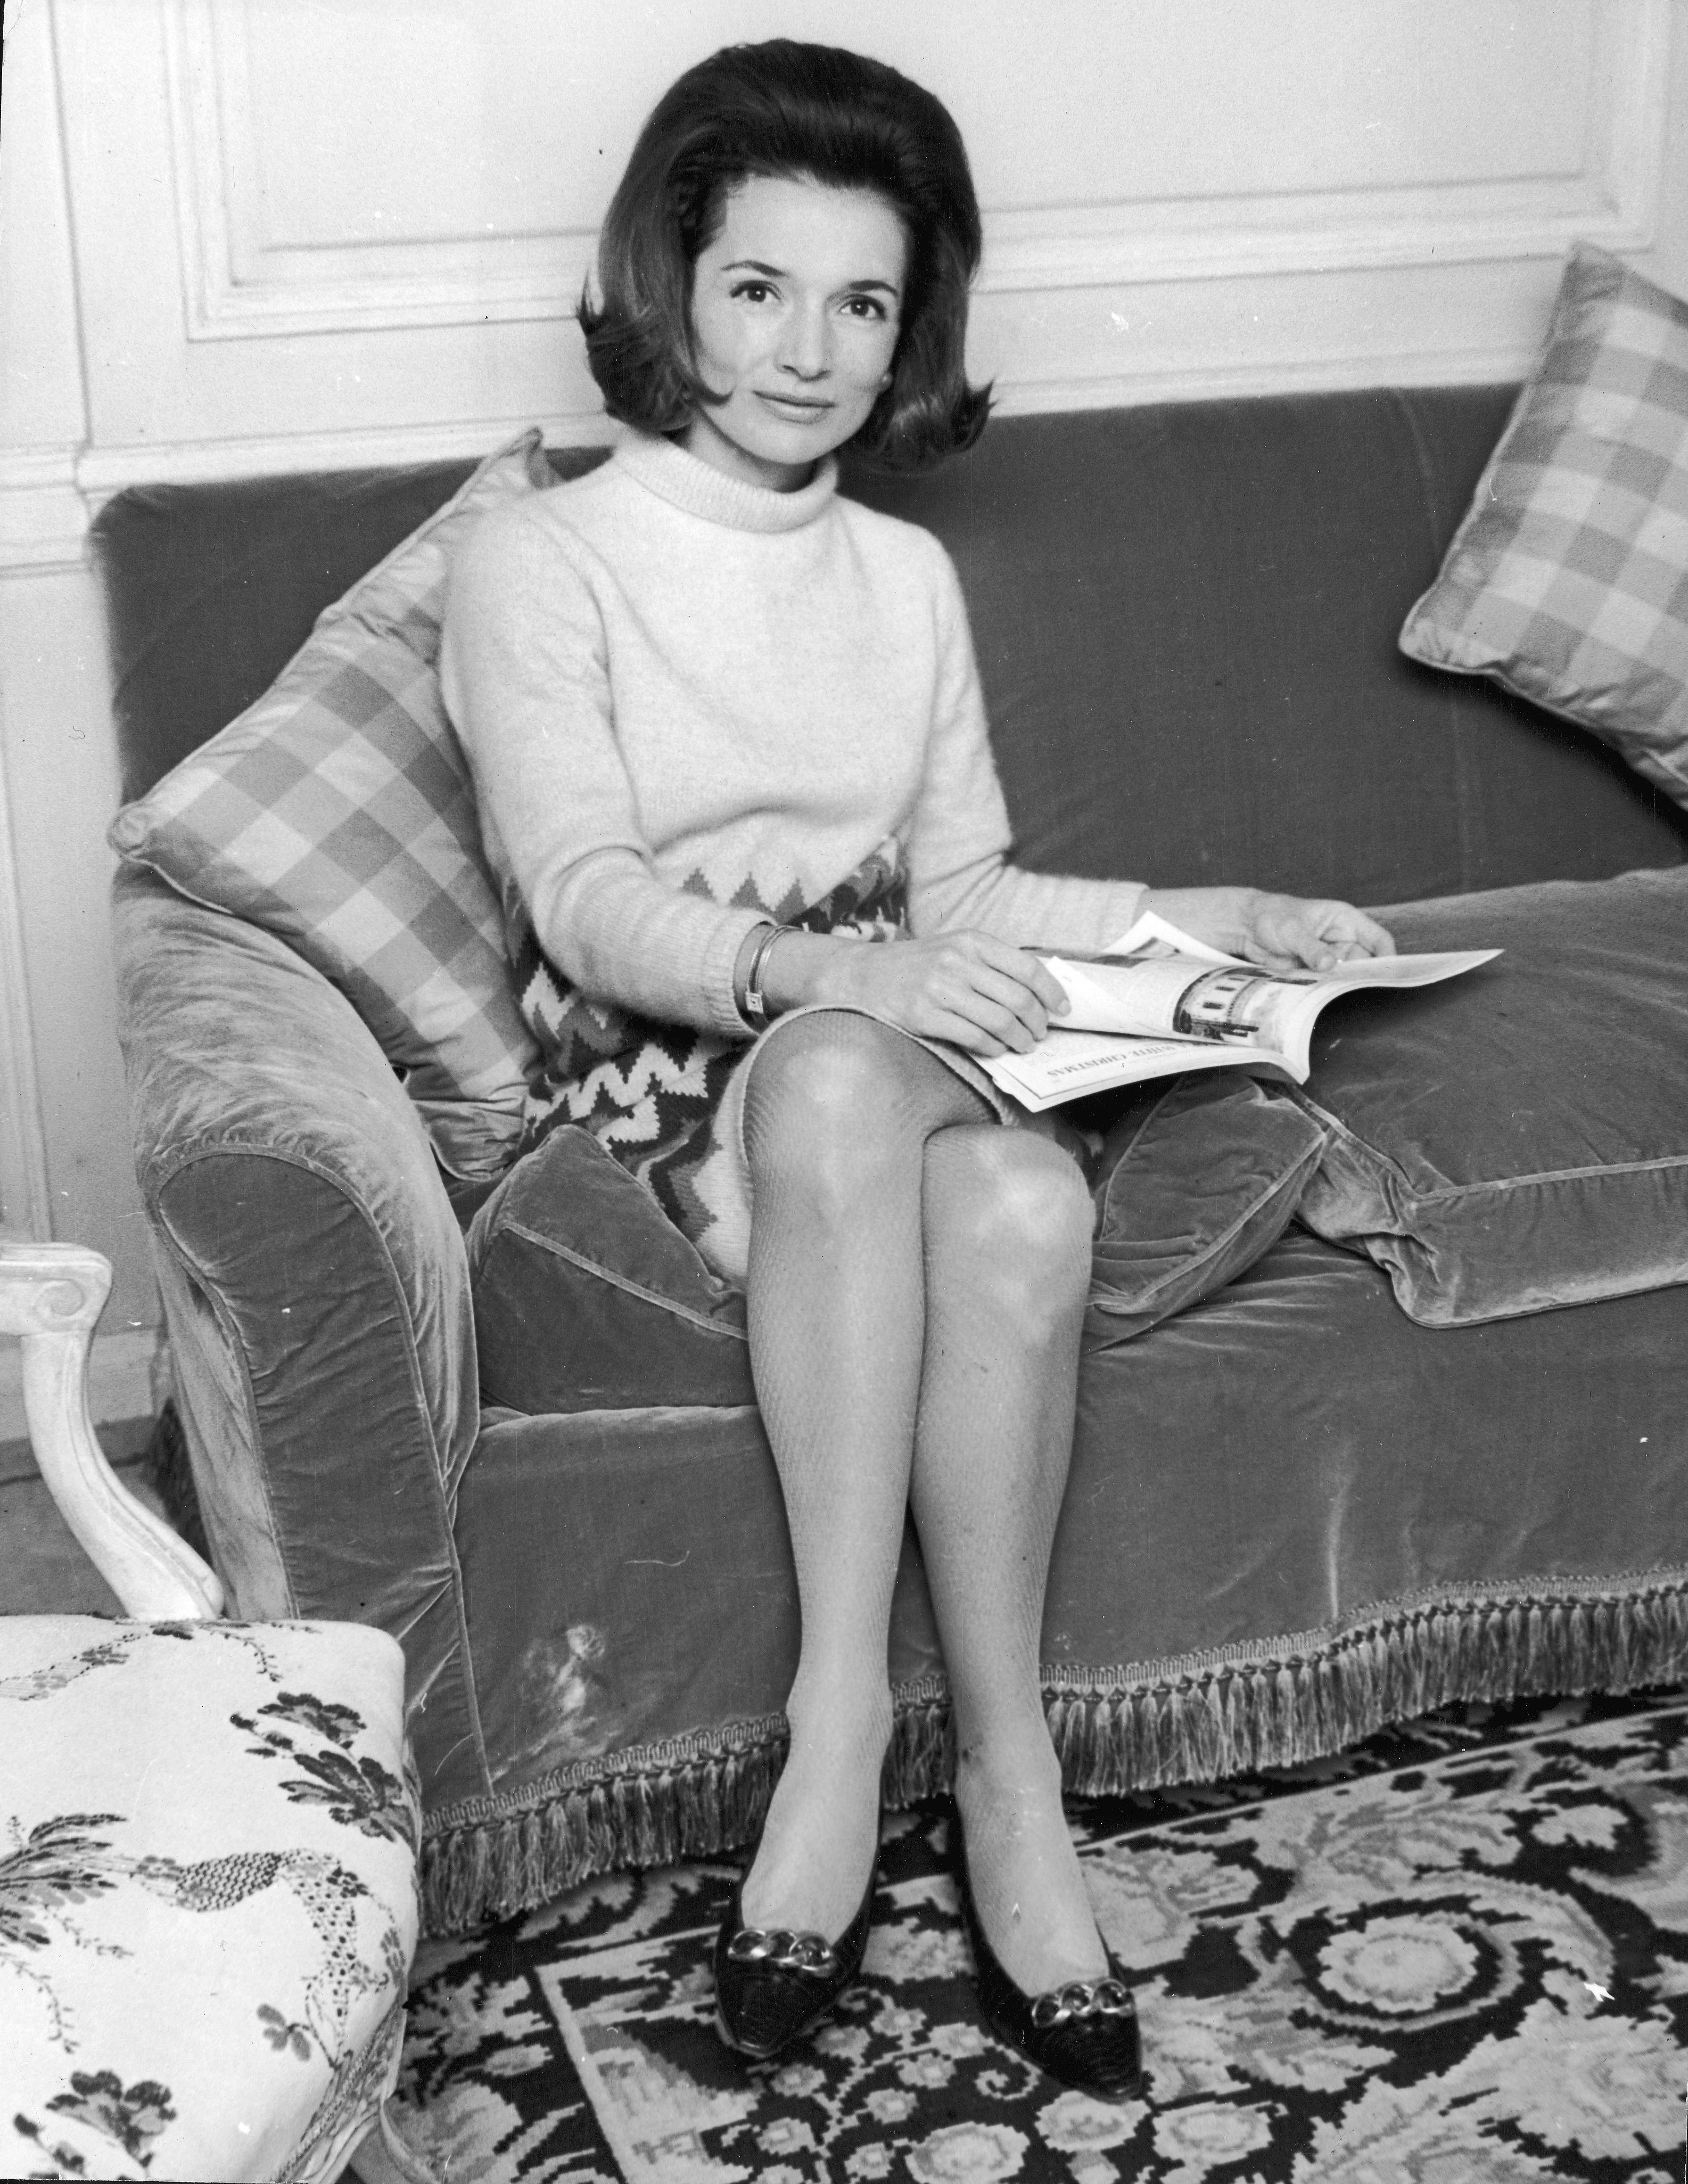 Lee Radziwill sitting on a couch in the 60s | Photo: Getty Images